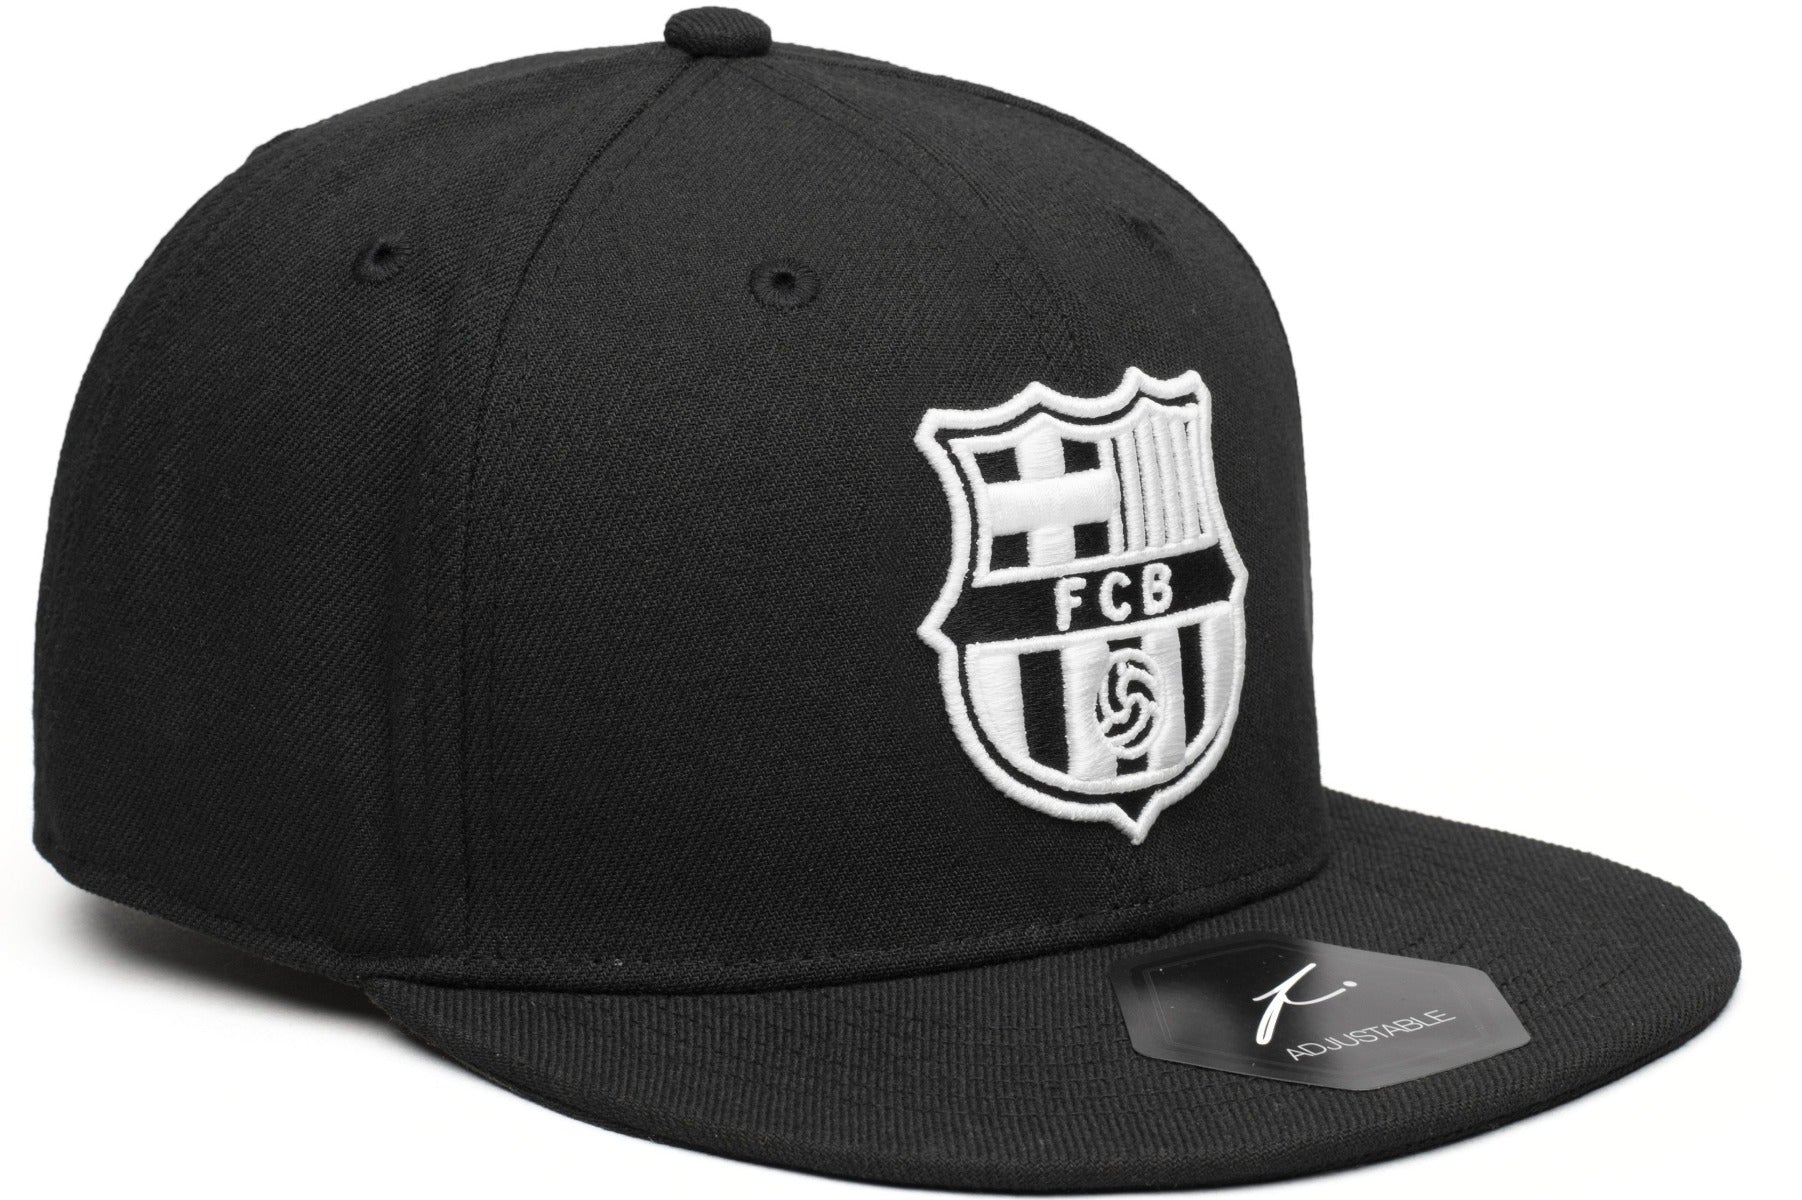 FI COLLECTIONS BARCELONA SNAPBACK HAT